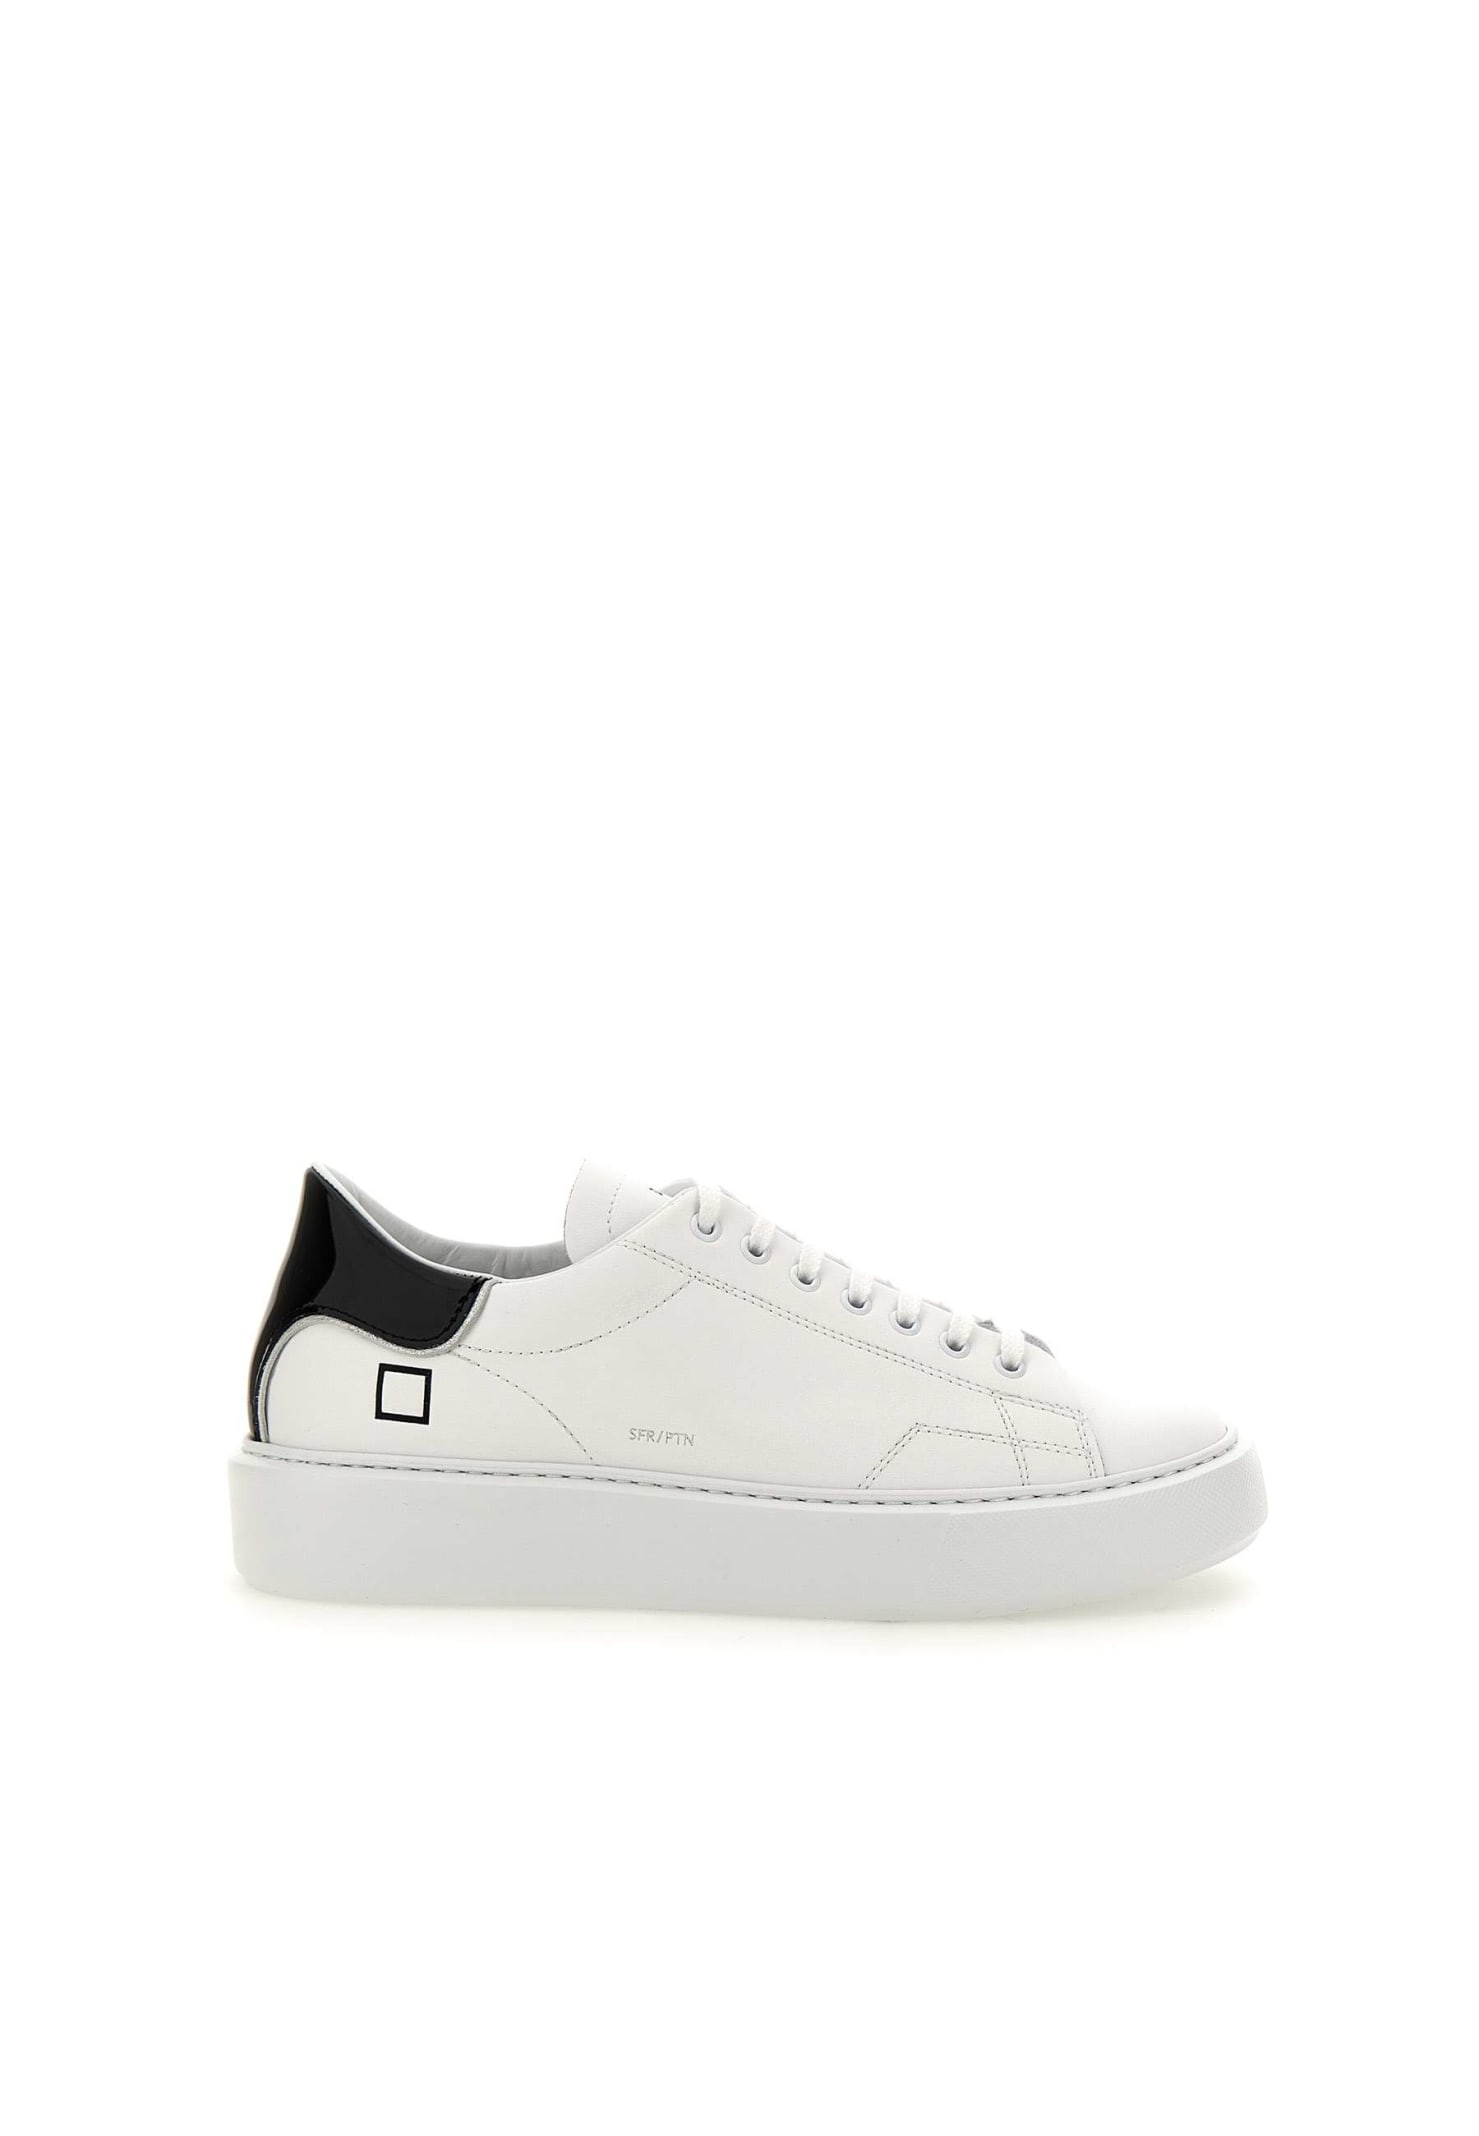 DATE SFERA PATENT LEATHER SNEAKERS